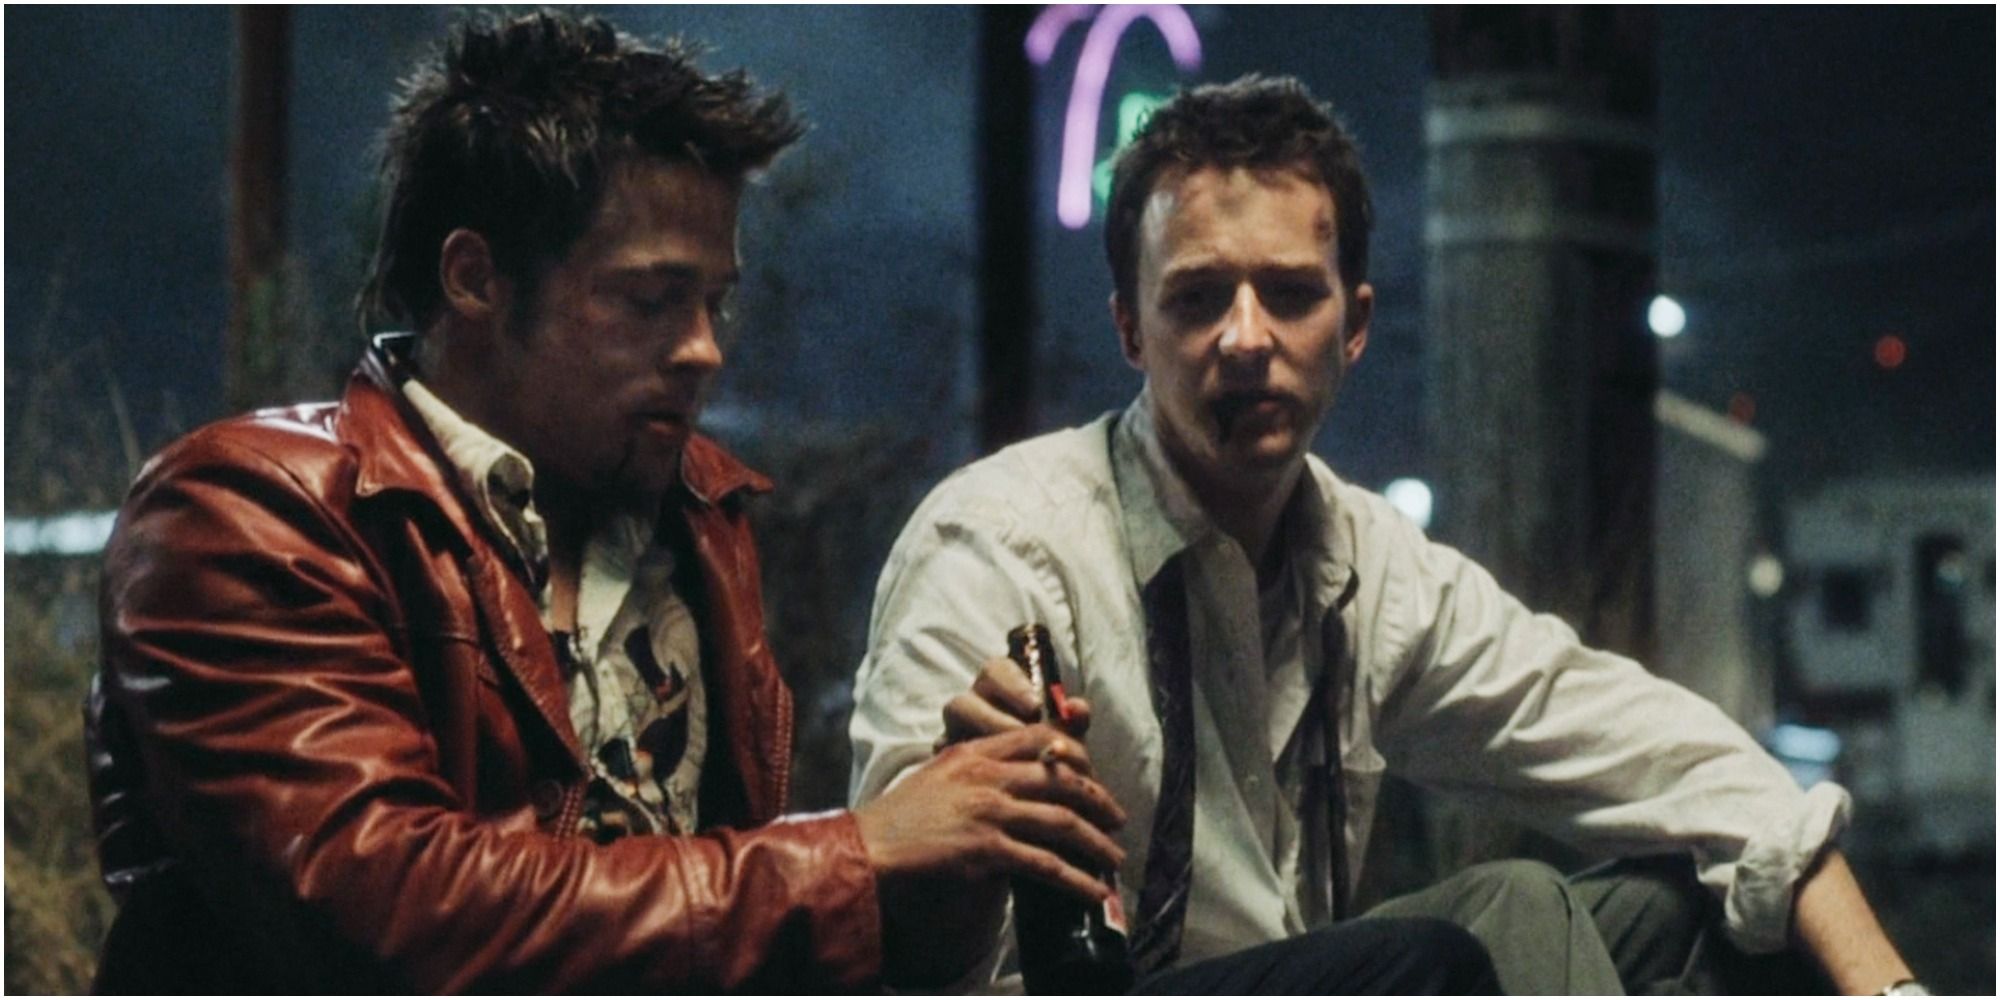 Fight Club: 10 Differences Between The Book And The Film